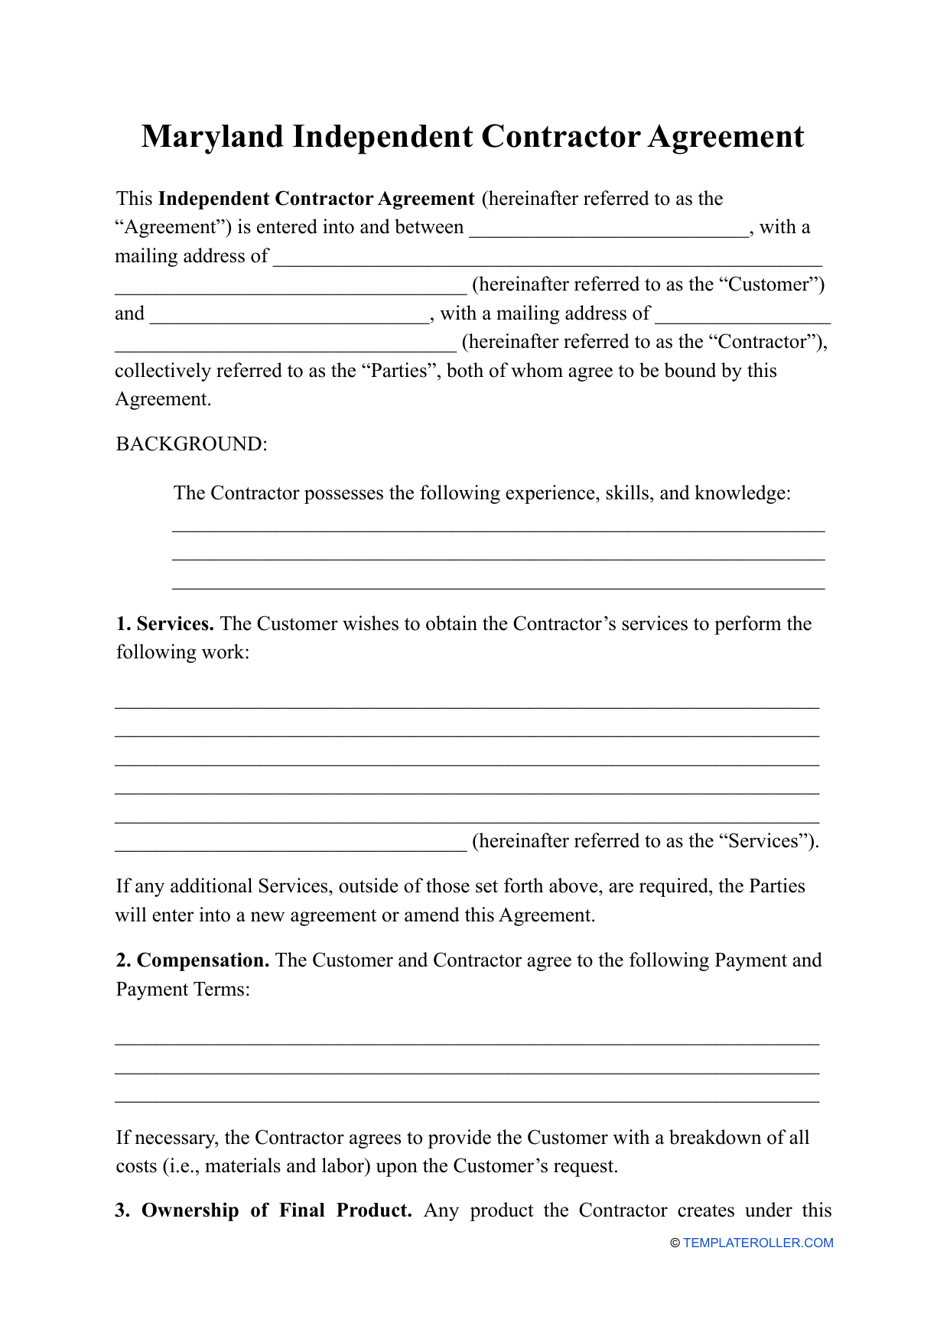 Independent Contractor Agreement Template - Maryland, Page 1